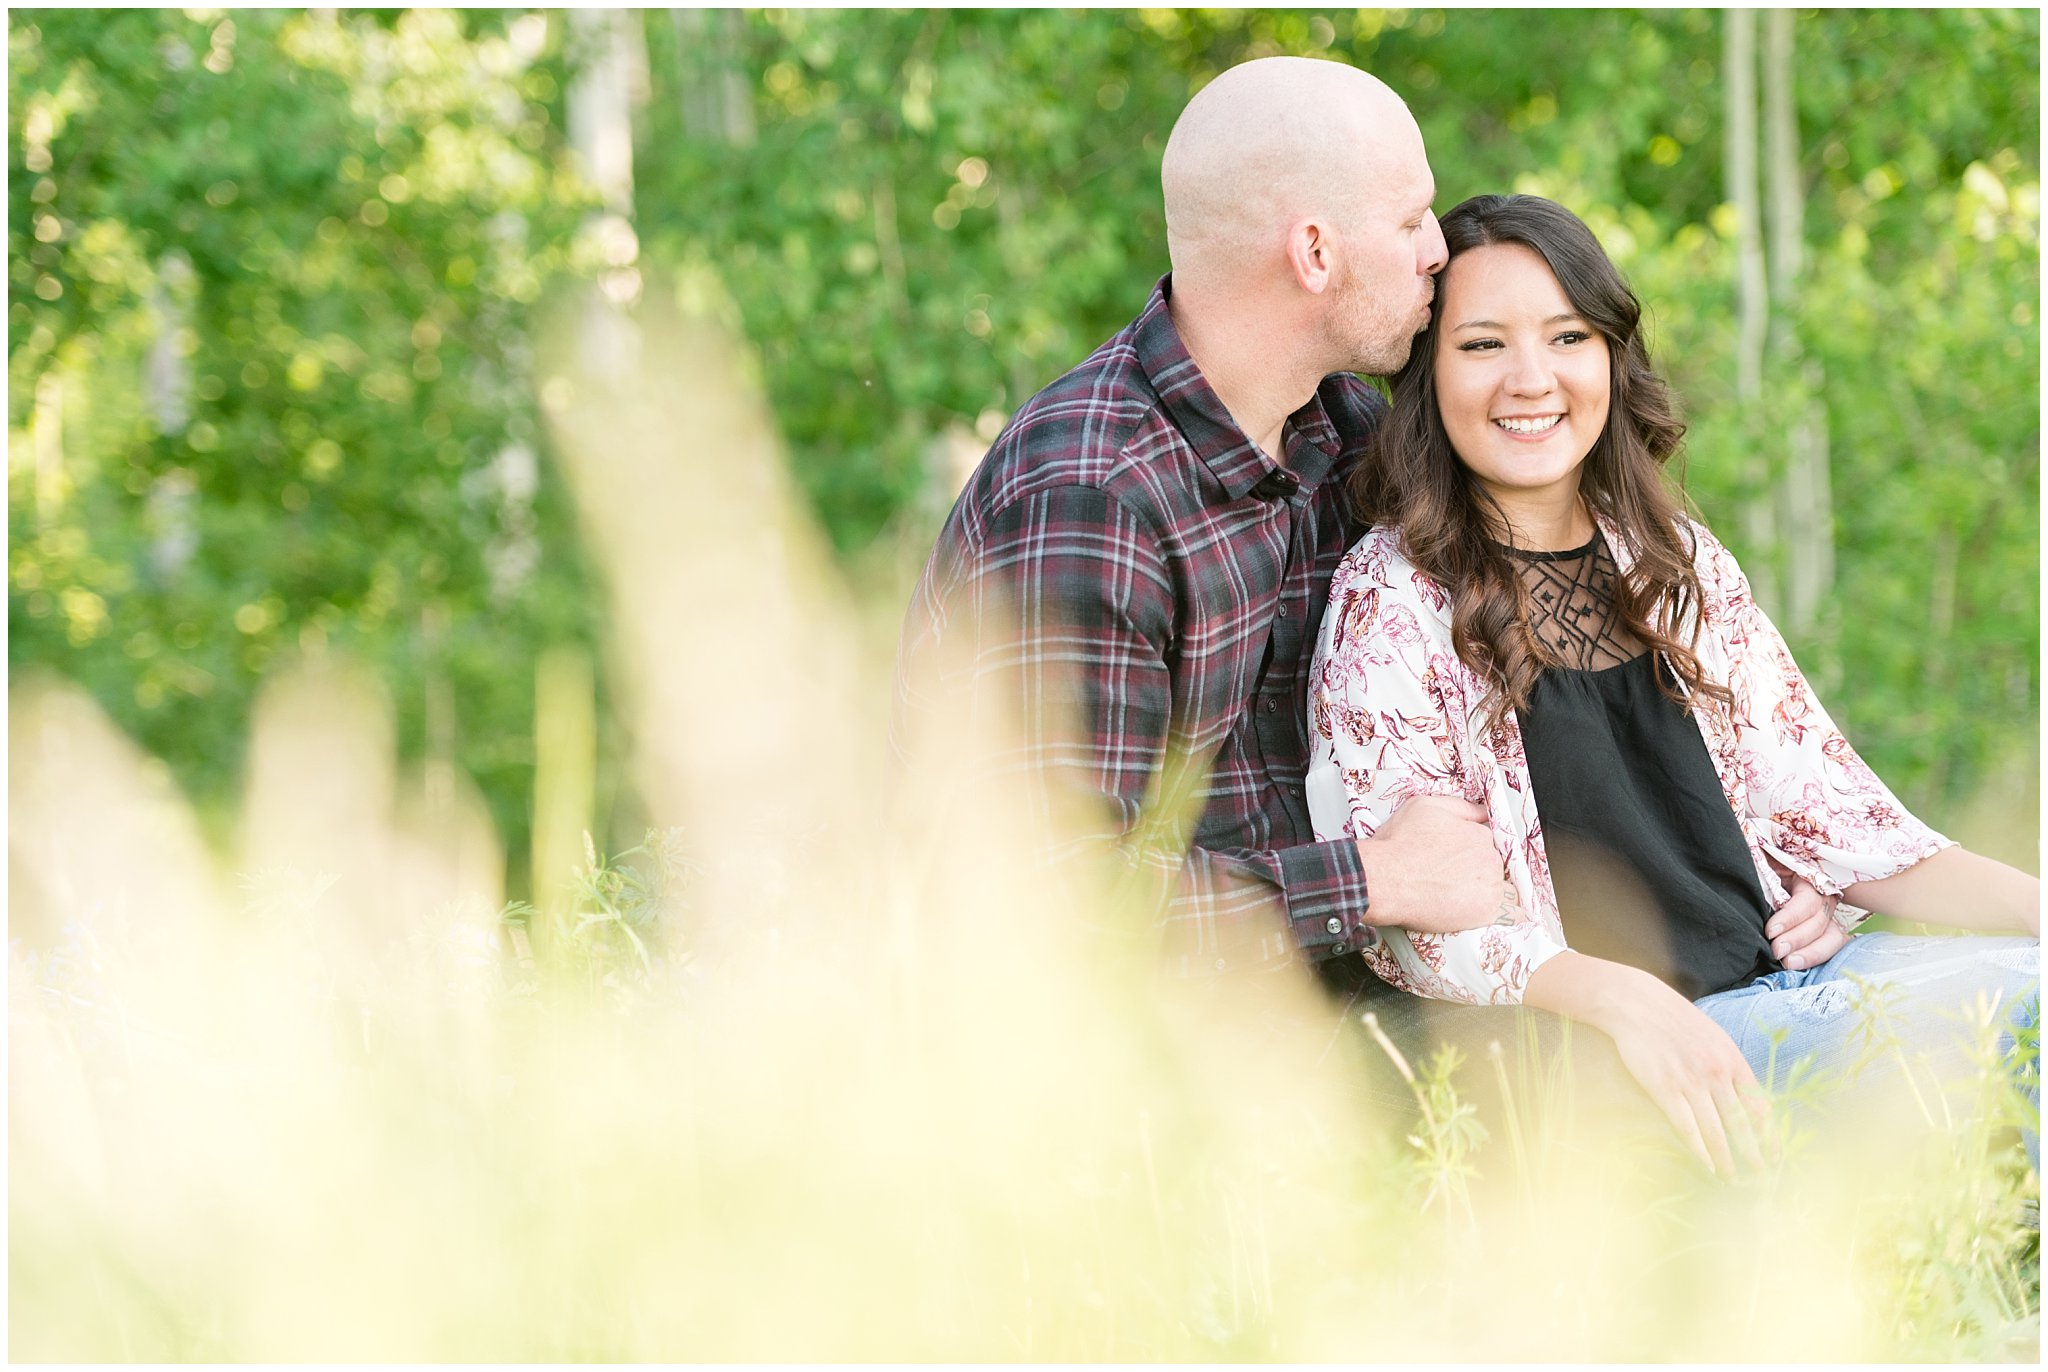 Candid couple pictures in the Aspen Trees and wildflowers during engagement session | Snowbasin Utah Engagements